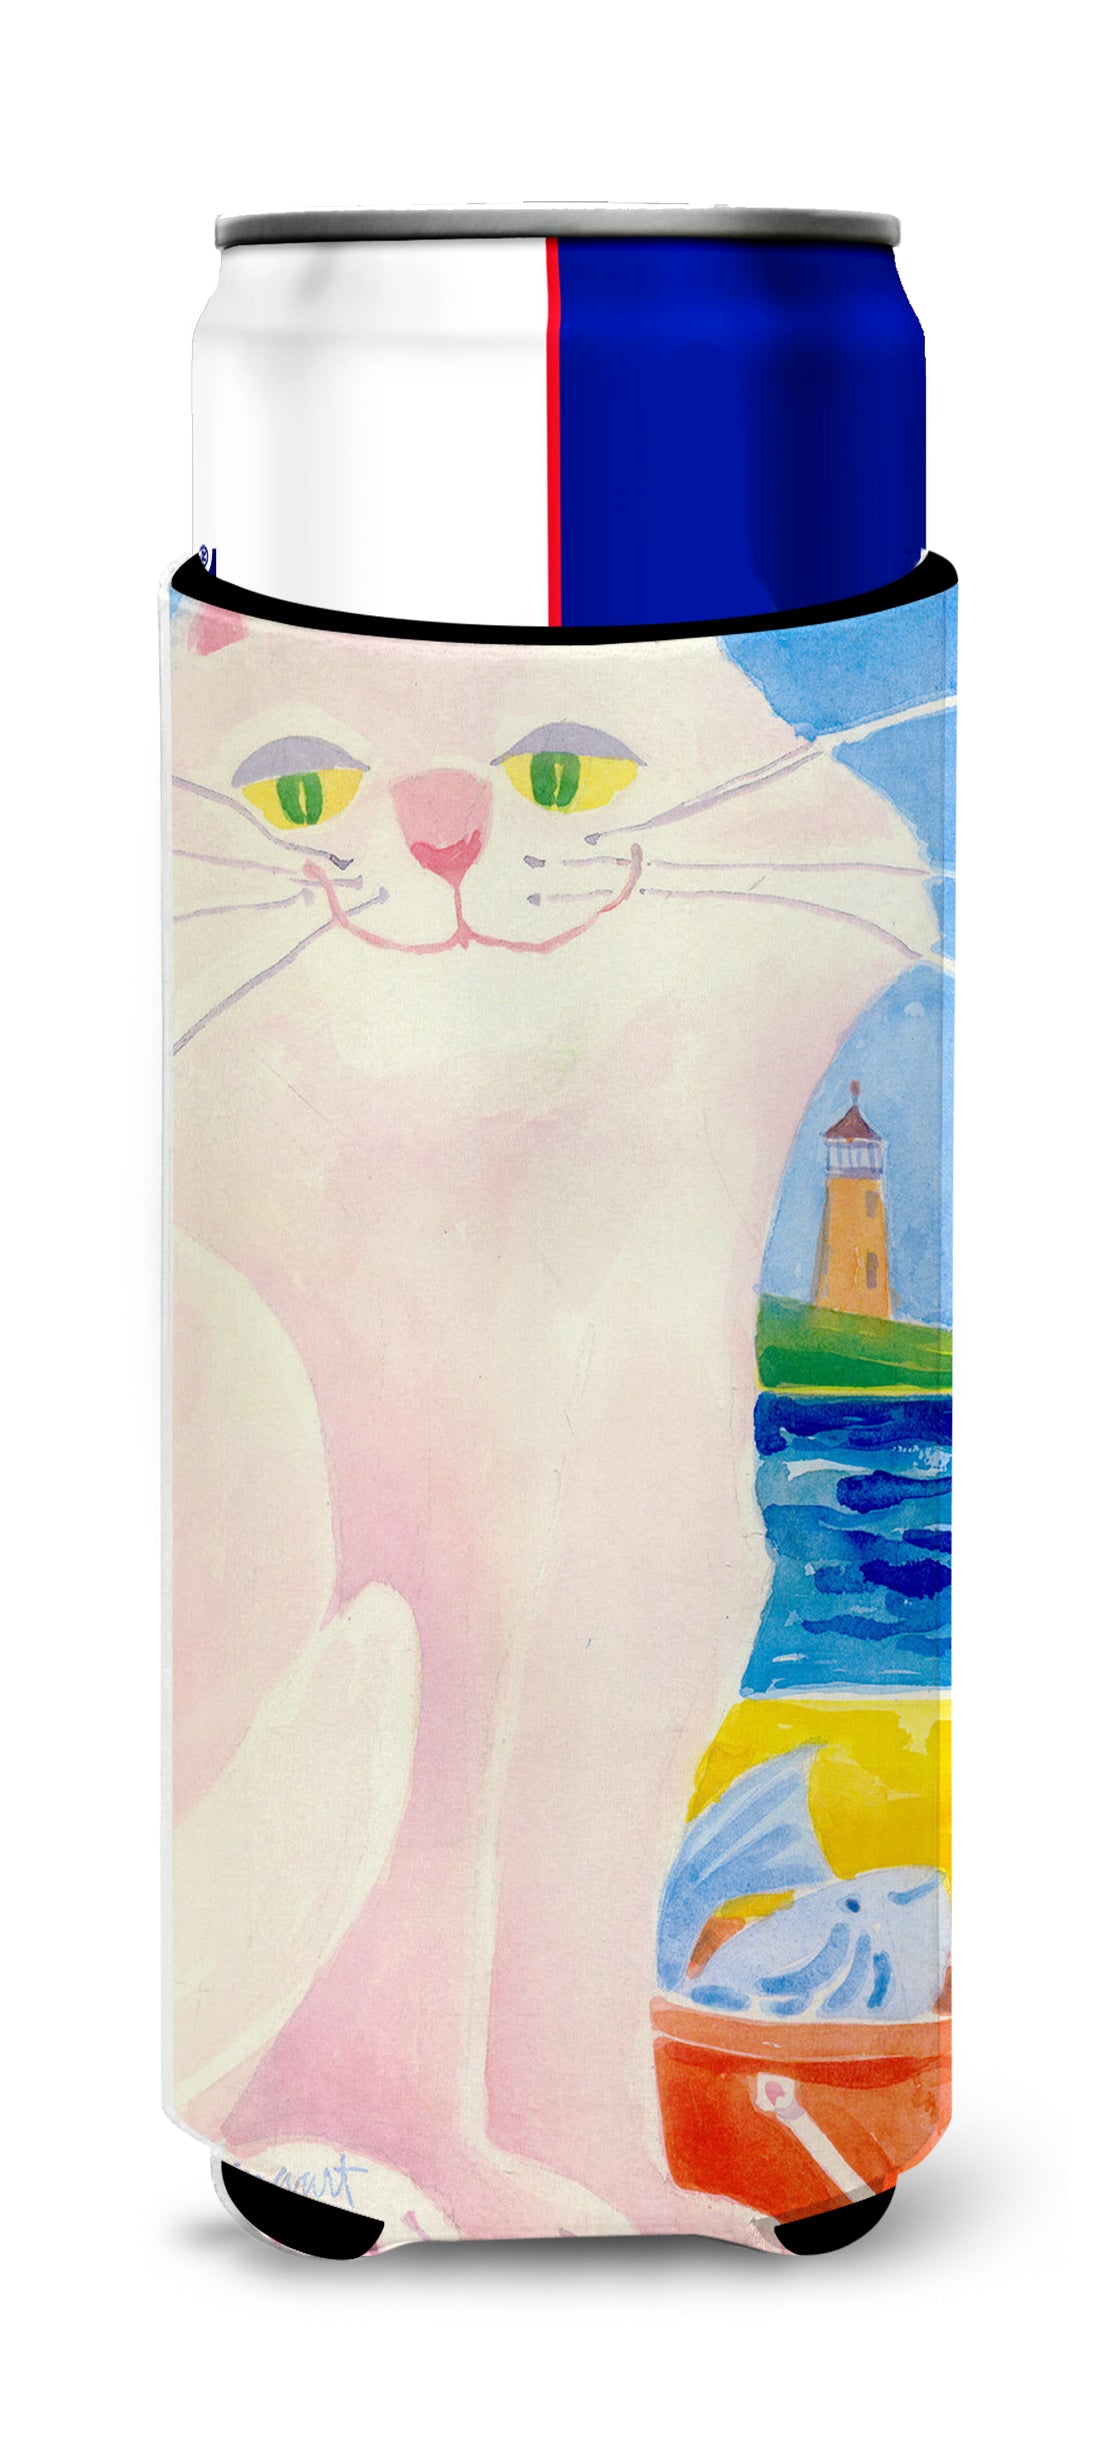 Big white Cat at the beach Ultra Beverage Insulators for slim cans 6018MUK.